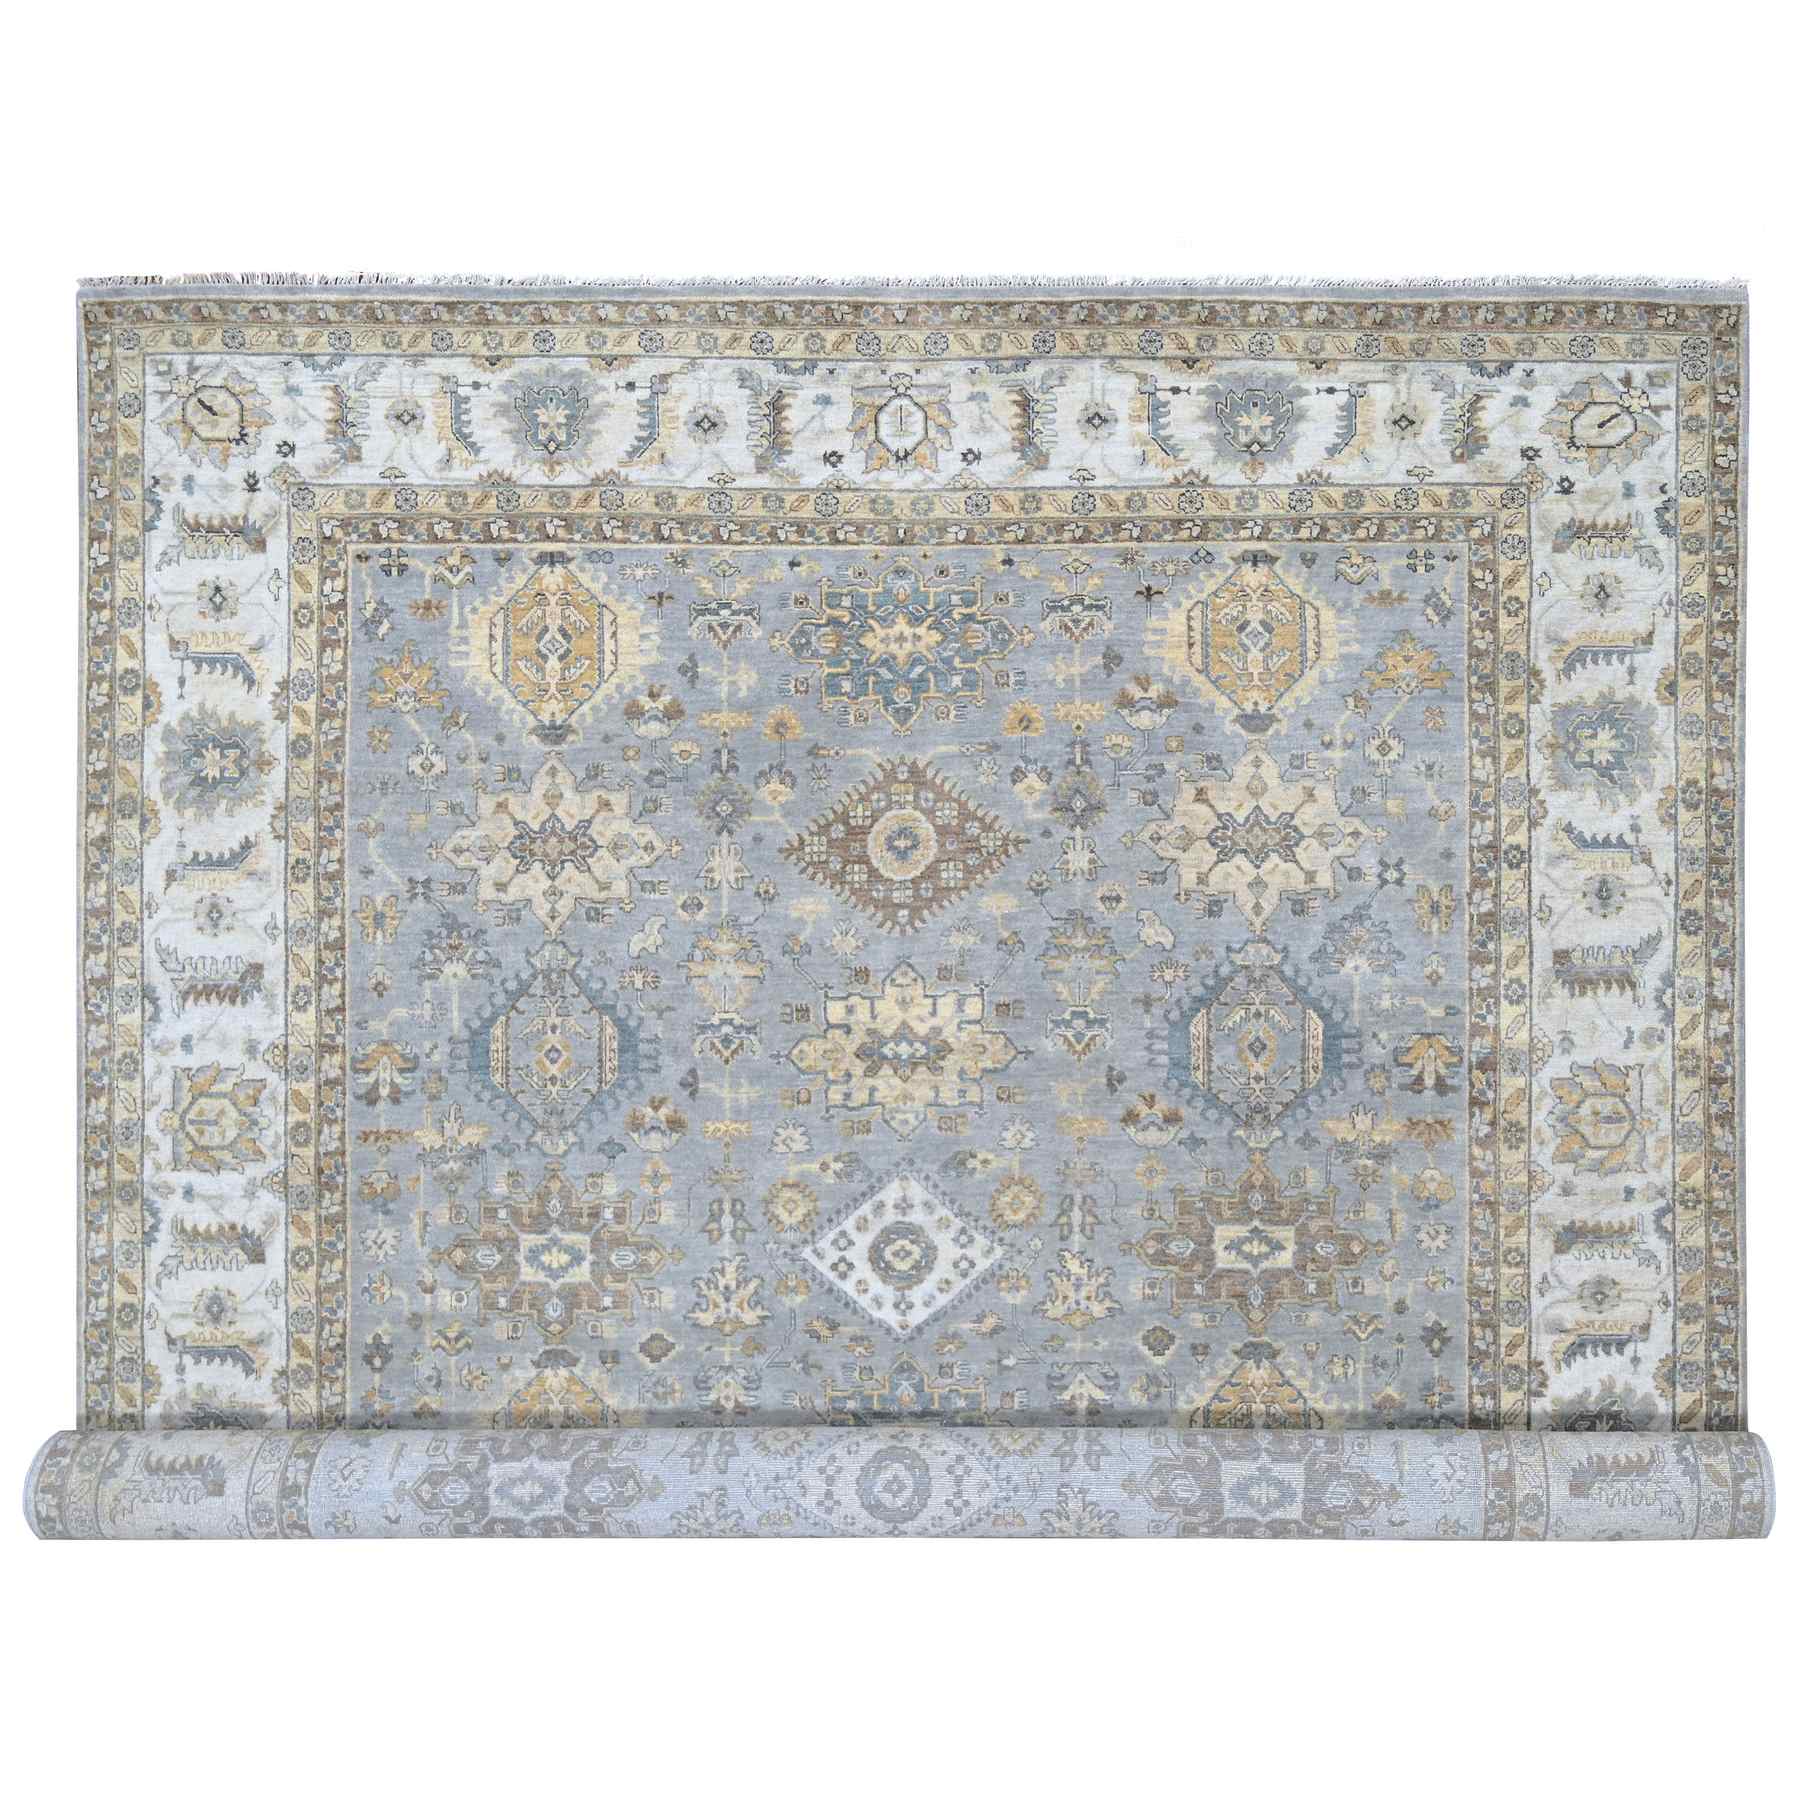 Rainer Gray and Heron White, Karajeh All Over Geometric Design, Hand Knotted, Natural Dyes, 100% Wool, Oriental Rug